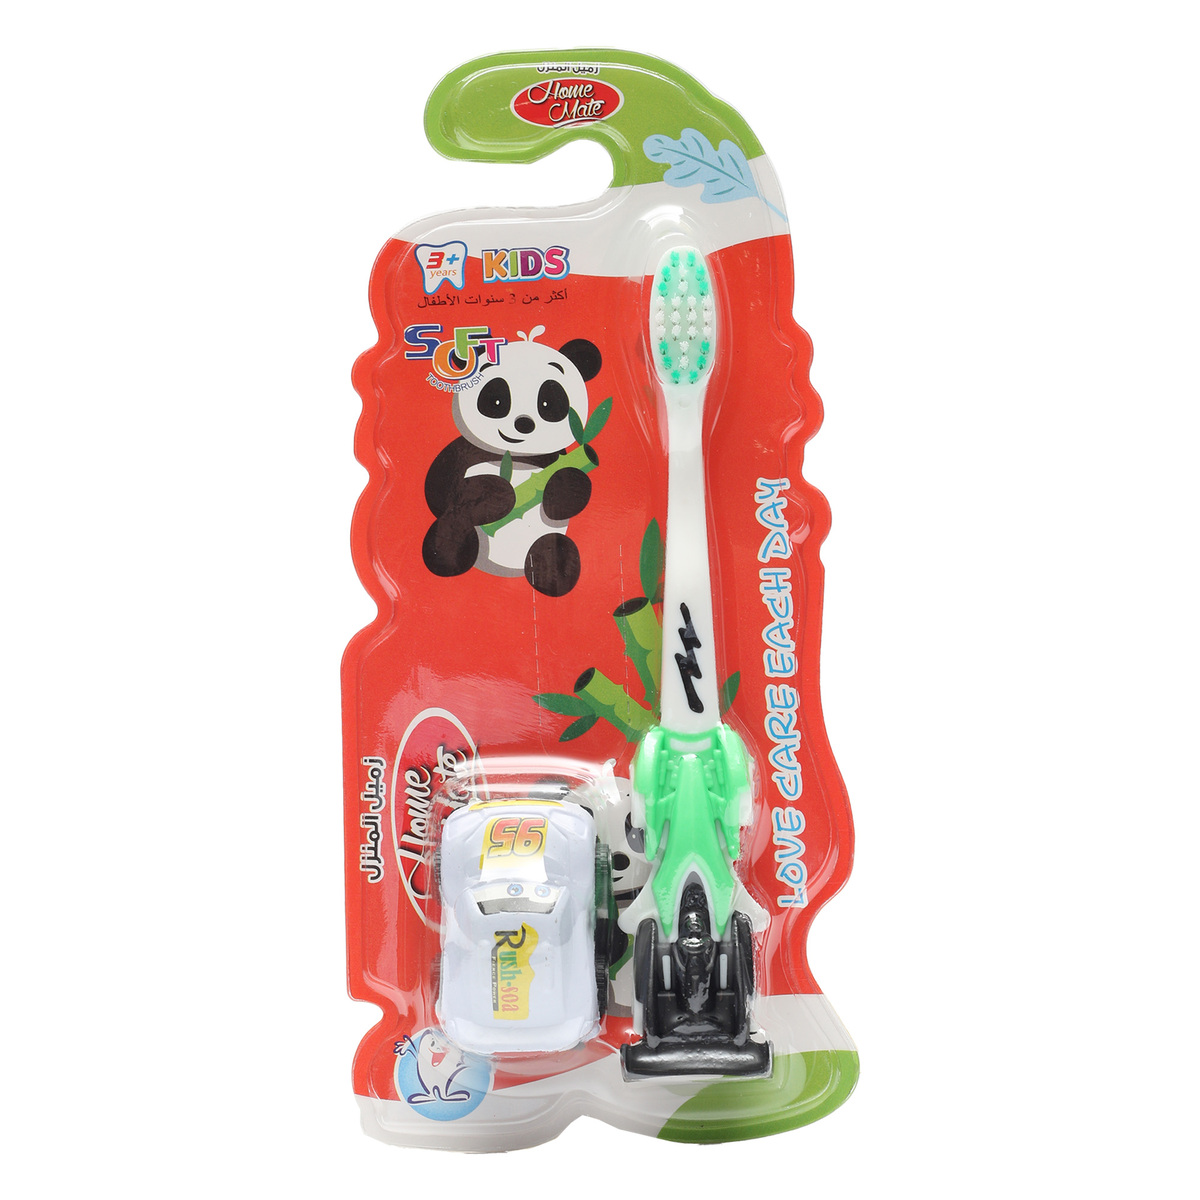 Home Mate Kids Soft Tooth Brush + Toy 3025C 1 pc